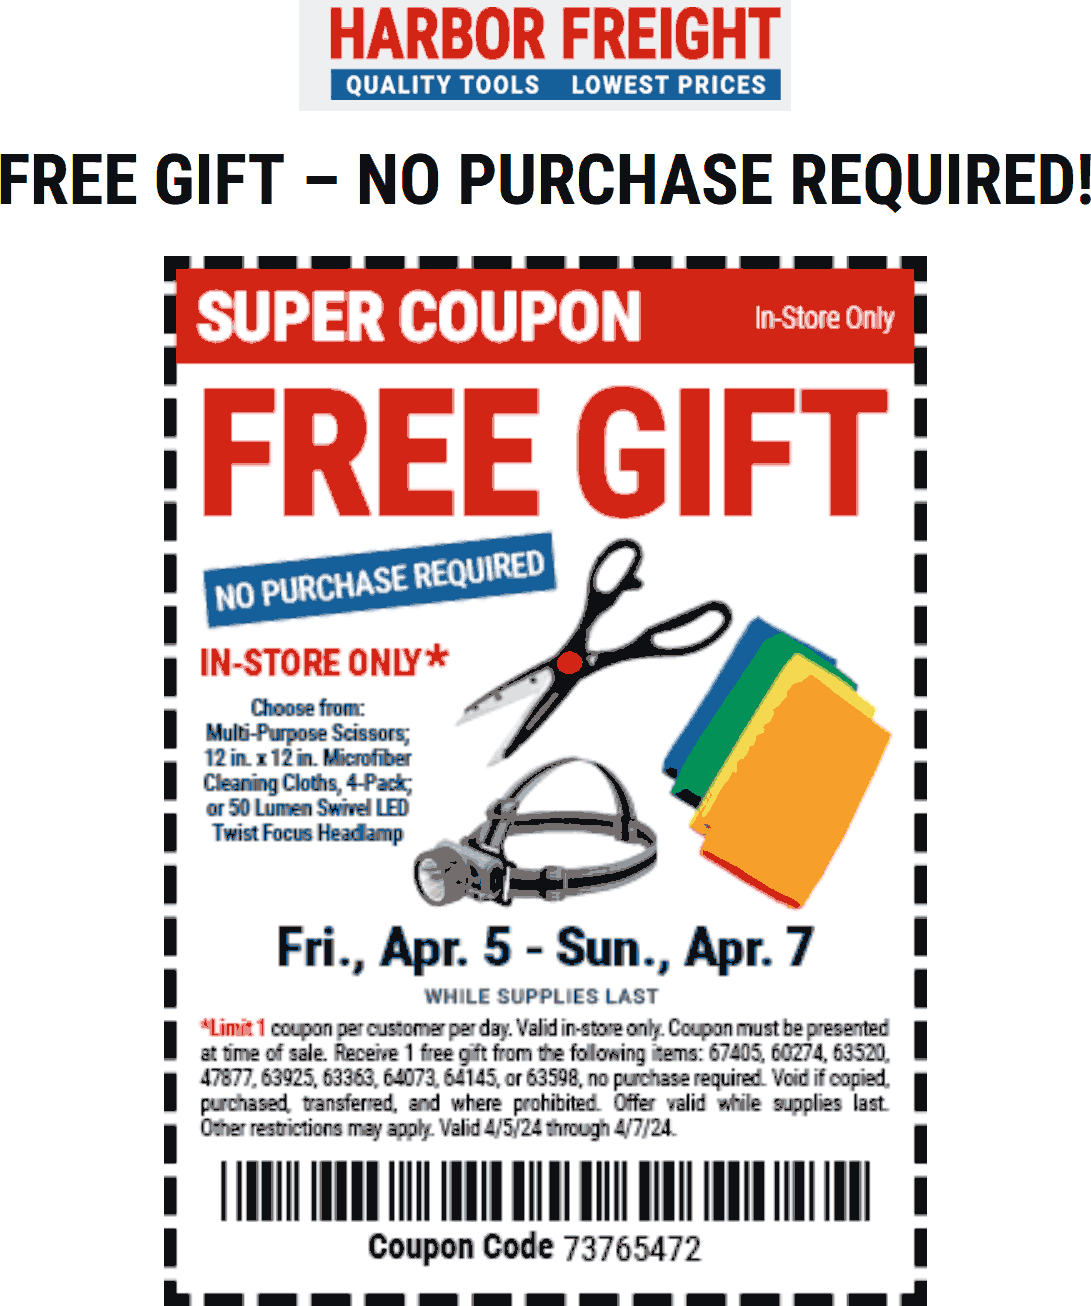 Harbor Freight stores Coupon  Free scissors, headlamp or microfibers today at Harbor Freight Tools #harborfreight 